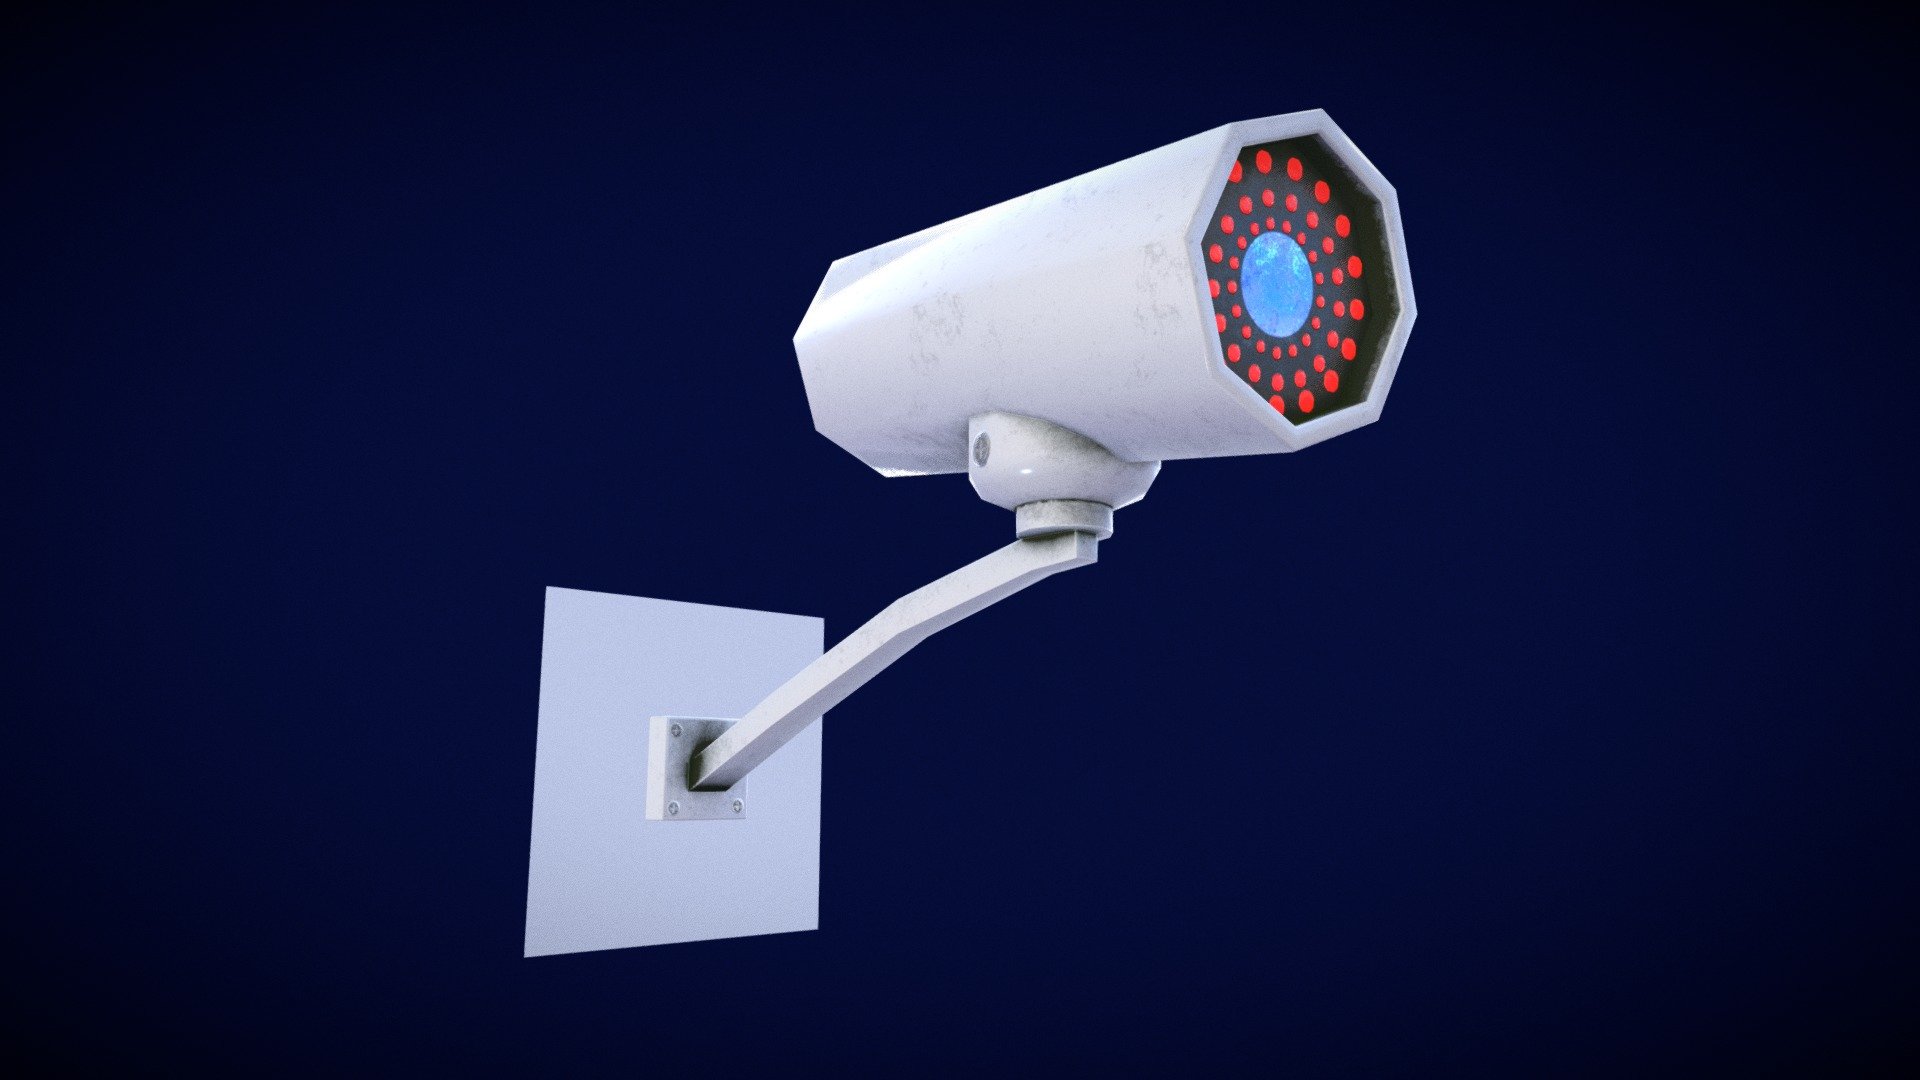 CCTV Camera - Low Poly Model

-CCTV Camera - Low Poly is Modeled in Blender version 2.79b.

-Render Engine used: Blender Cycles version 2.79b

-For texturing Substance Painter is used.

-Low Poly model can be use in various scene setups.

-2K Material Textures included.

-.Blend, .Fbx and .Obj/.Mtl files included.

-As per Blender statistics the CCTV Camera - Low Poly  have (Verts:336 Faces:297 Tris:610) - CCTV Camera - Low Poly - 3D model by CG Buzz (@Tapan_S) 3d model